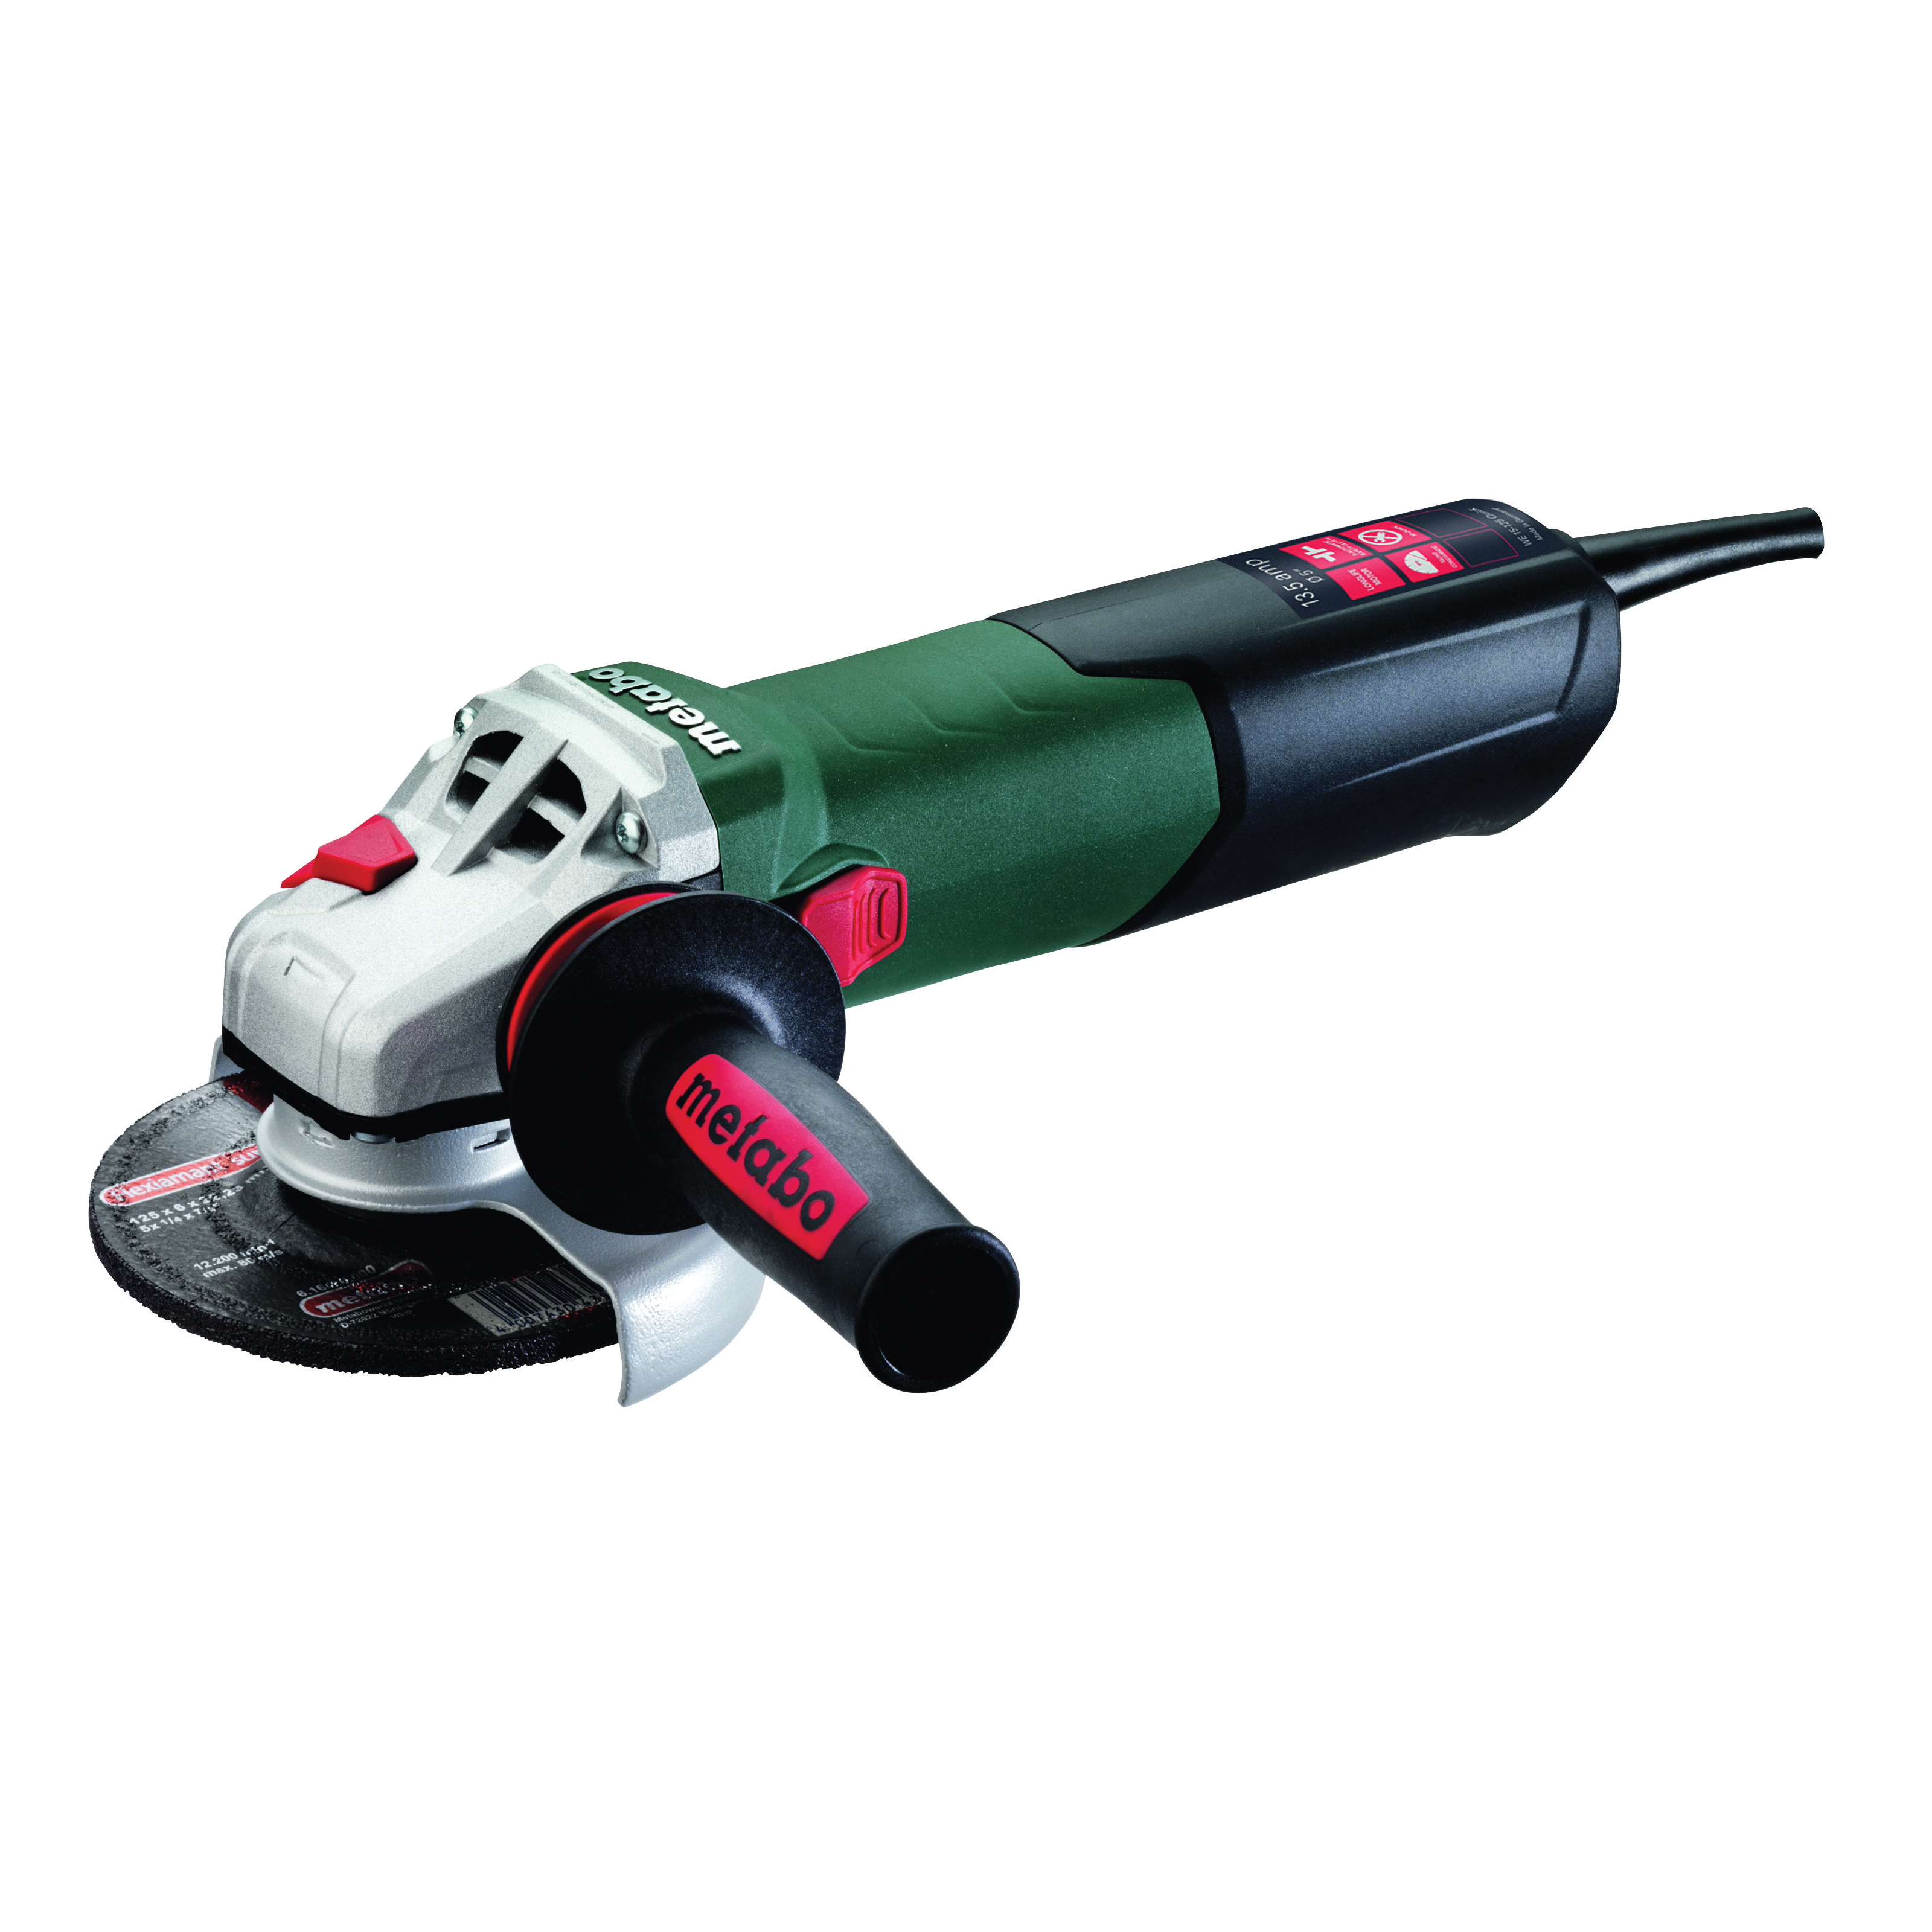 metabo® 600687420 Combination Hammer, 3200 bpm, 200 to 350 rpm No-Load